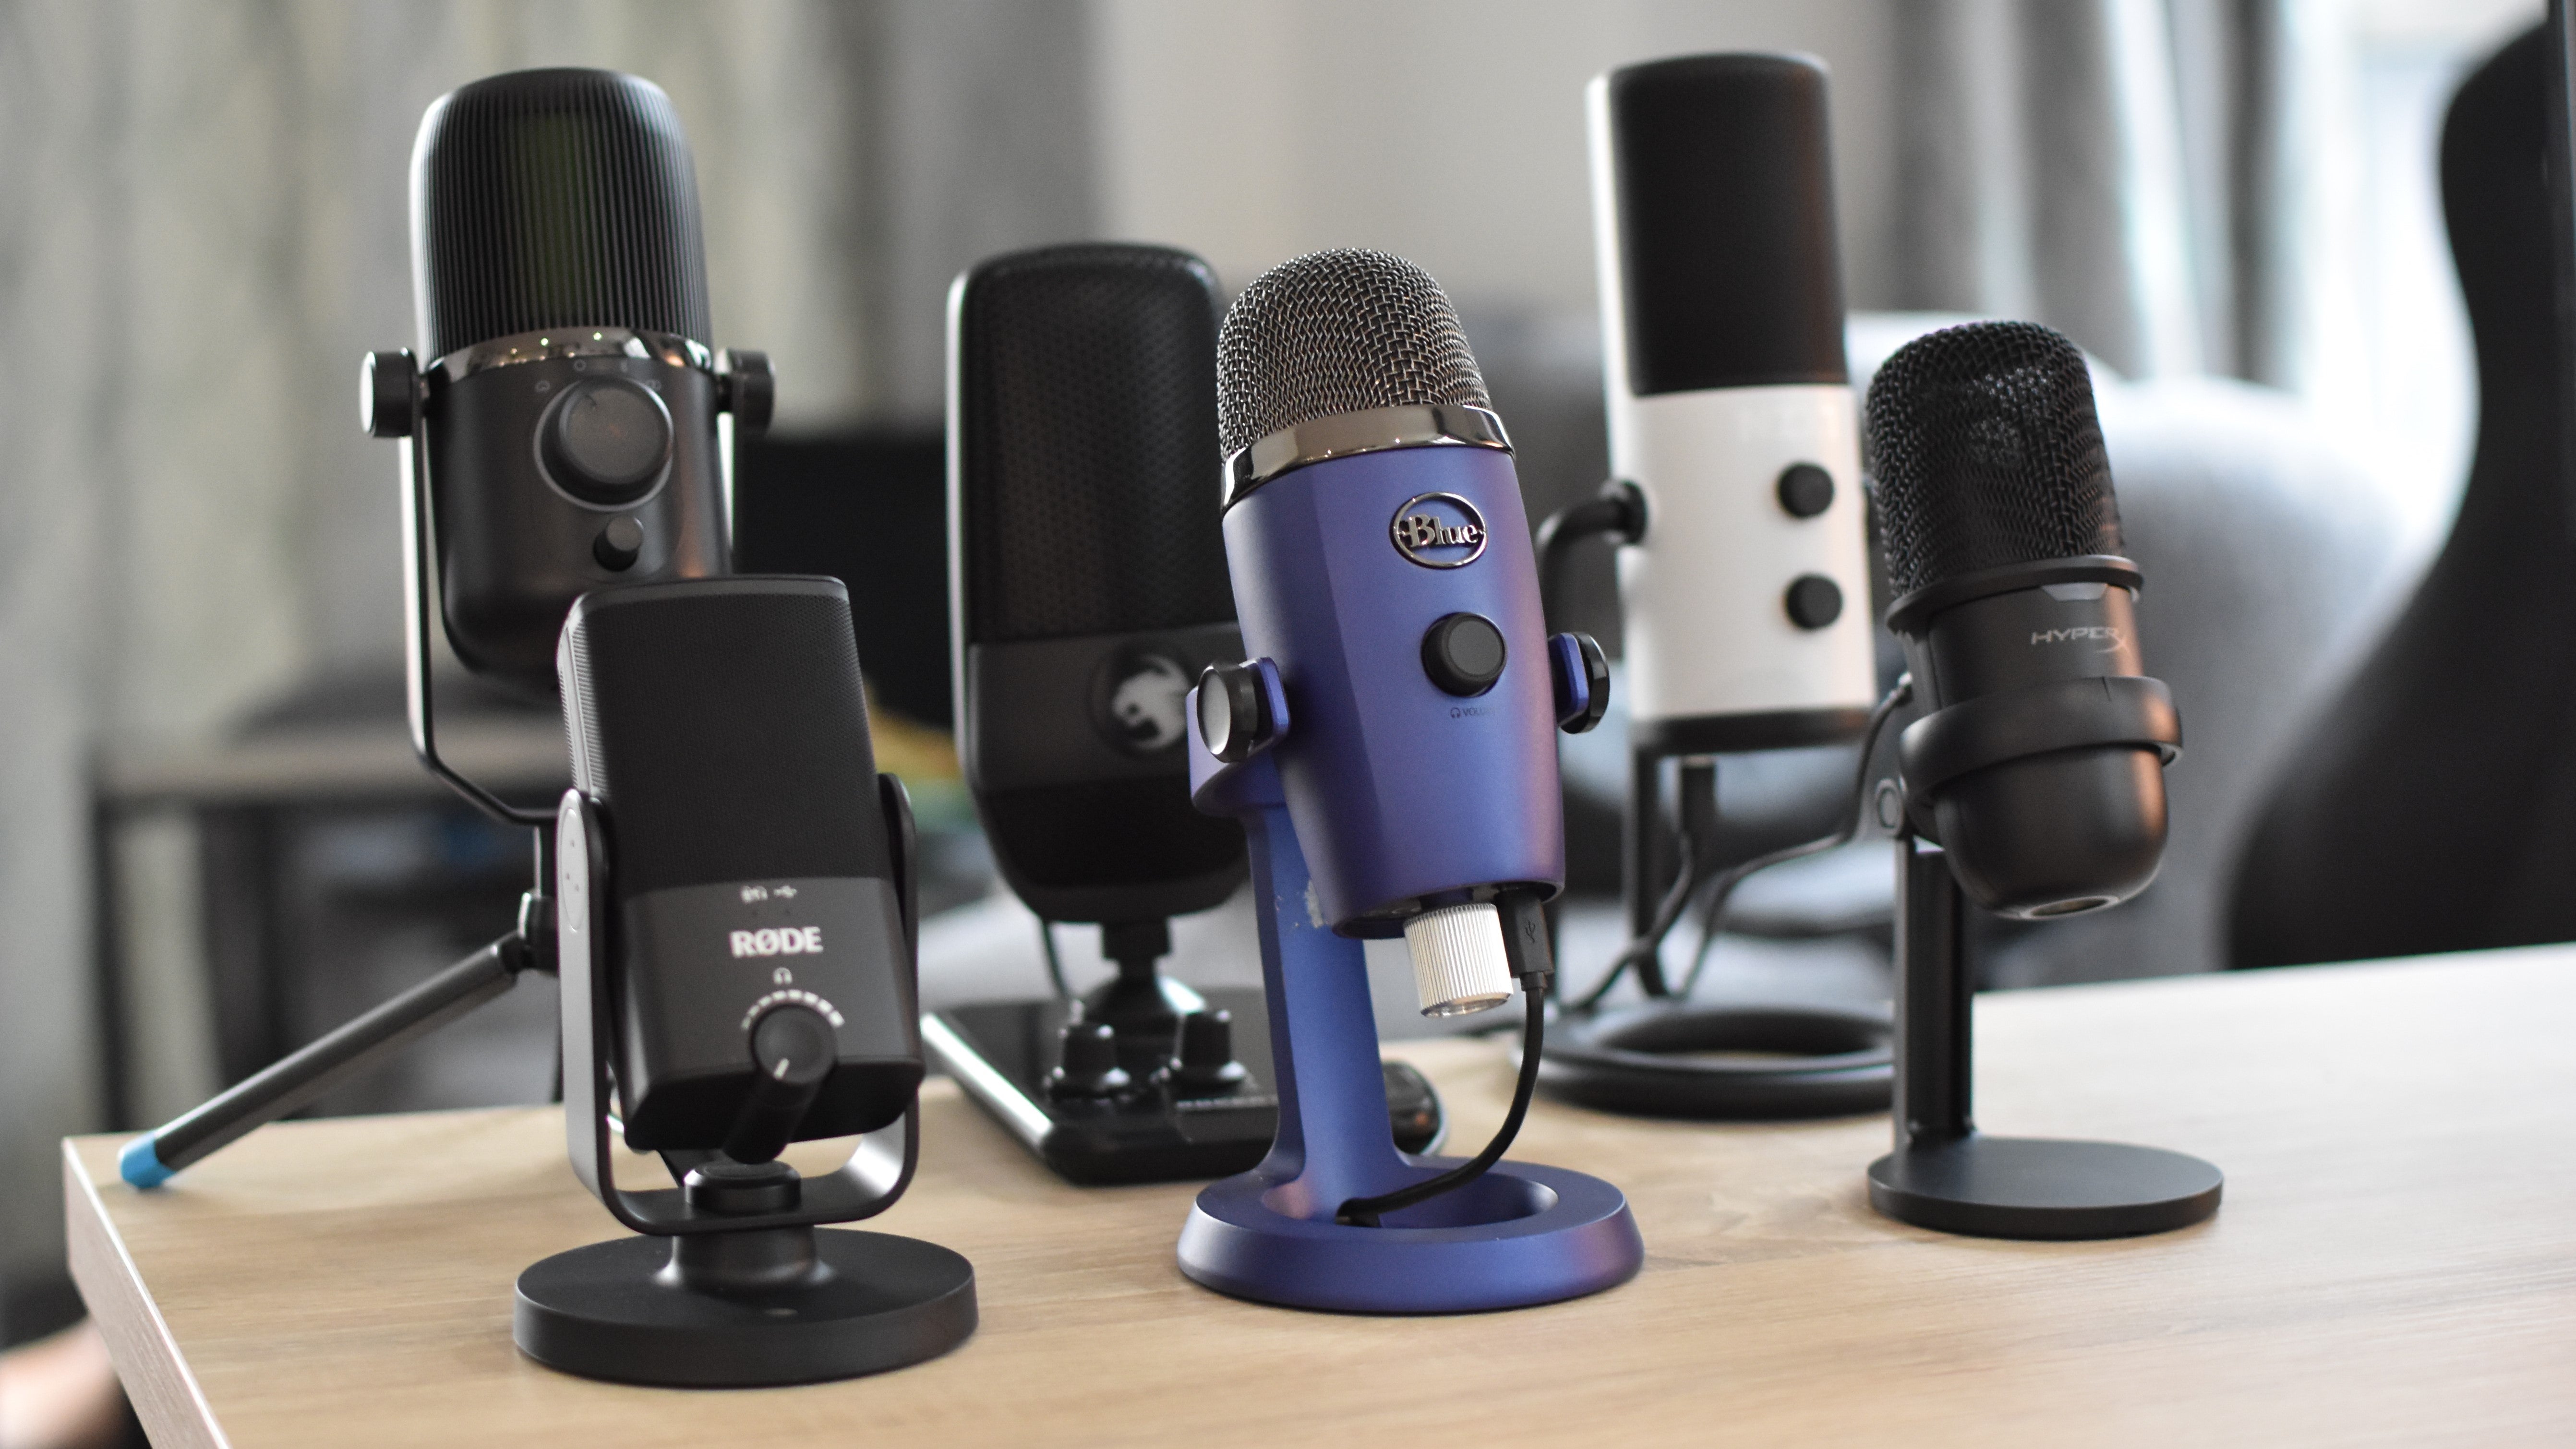 The best gaming microphones for PC: our picks of the best USB mics